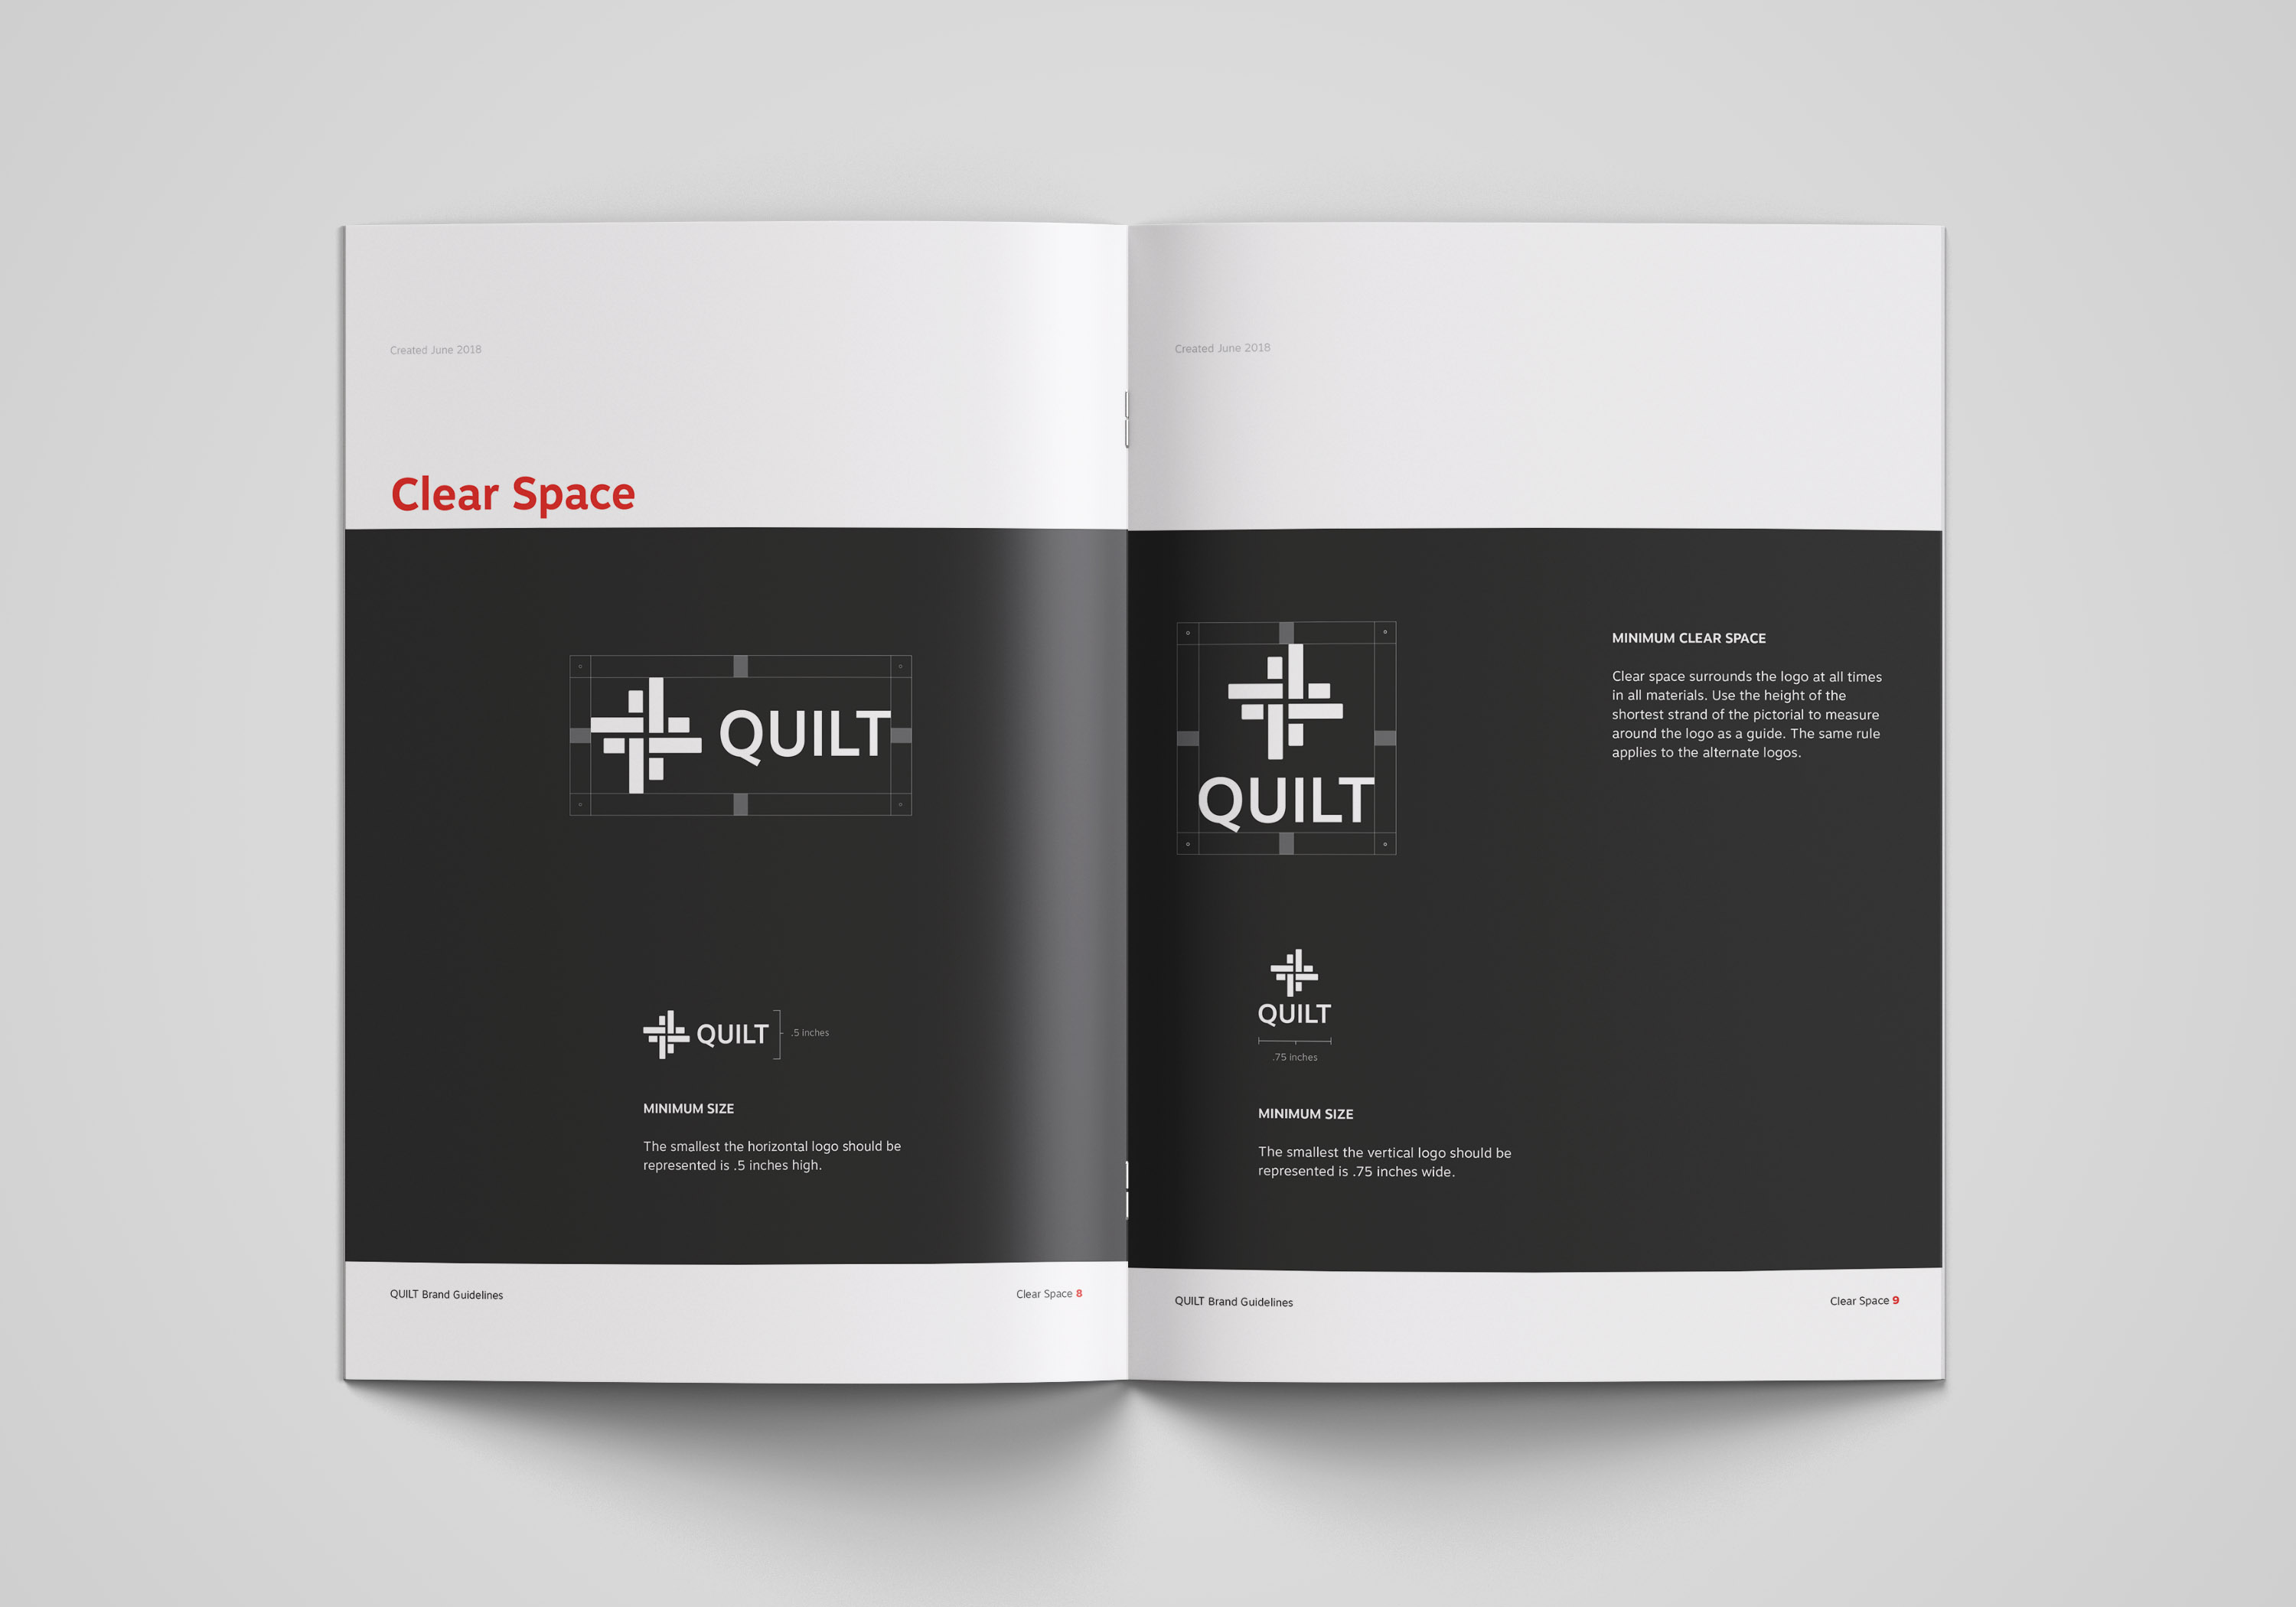 Branding guidelines spread about clear space and minimum size.